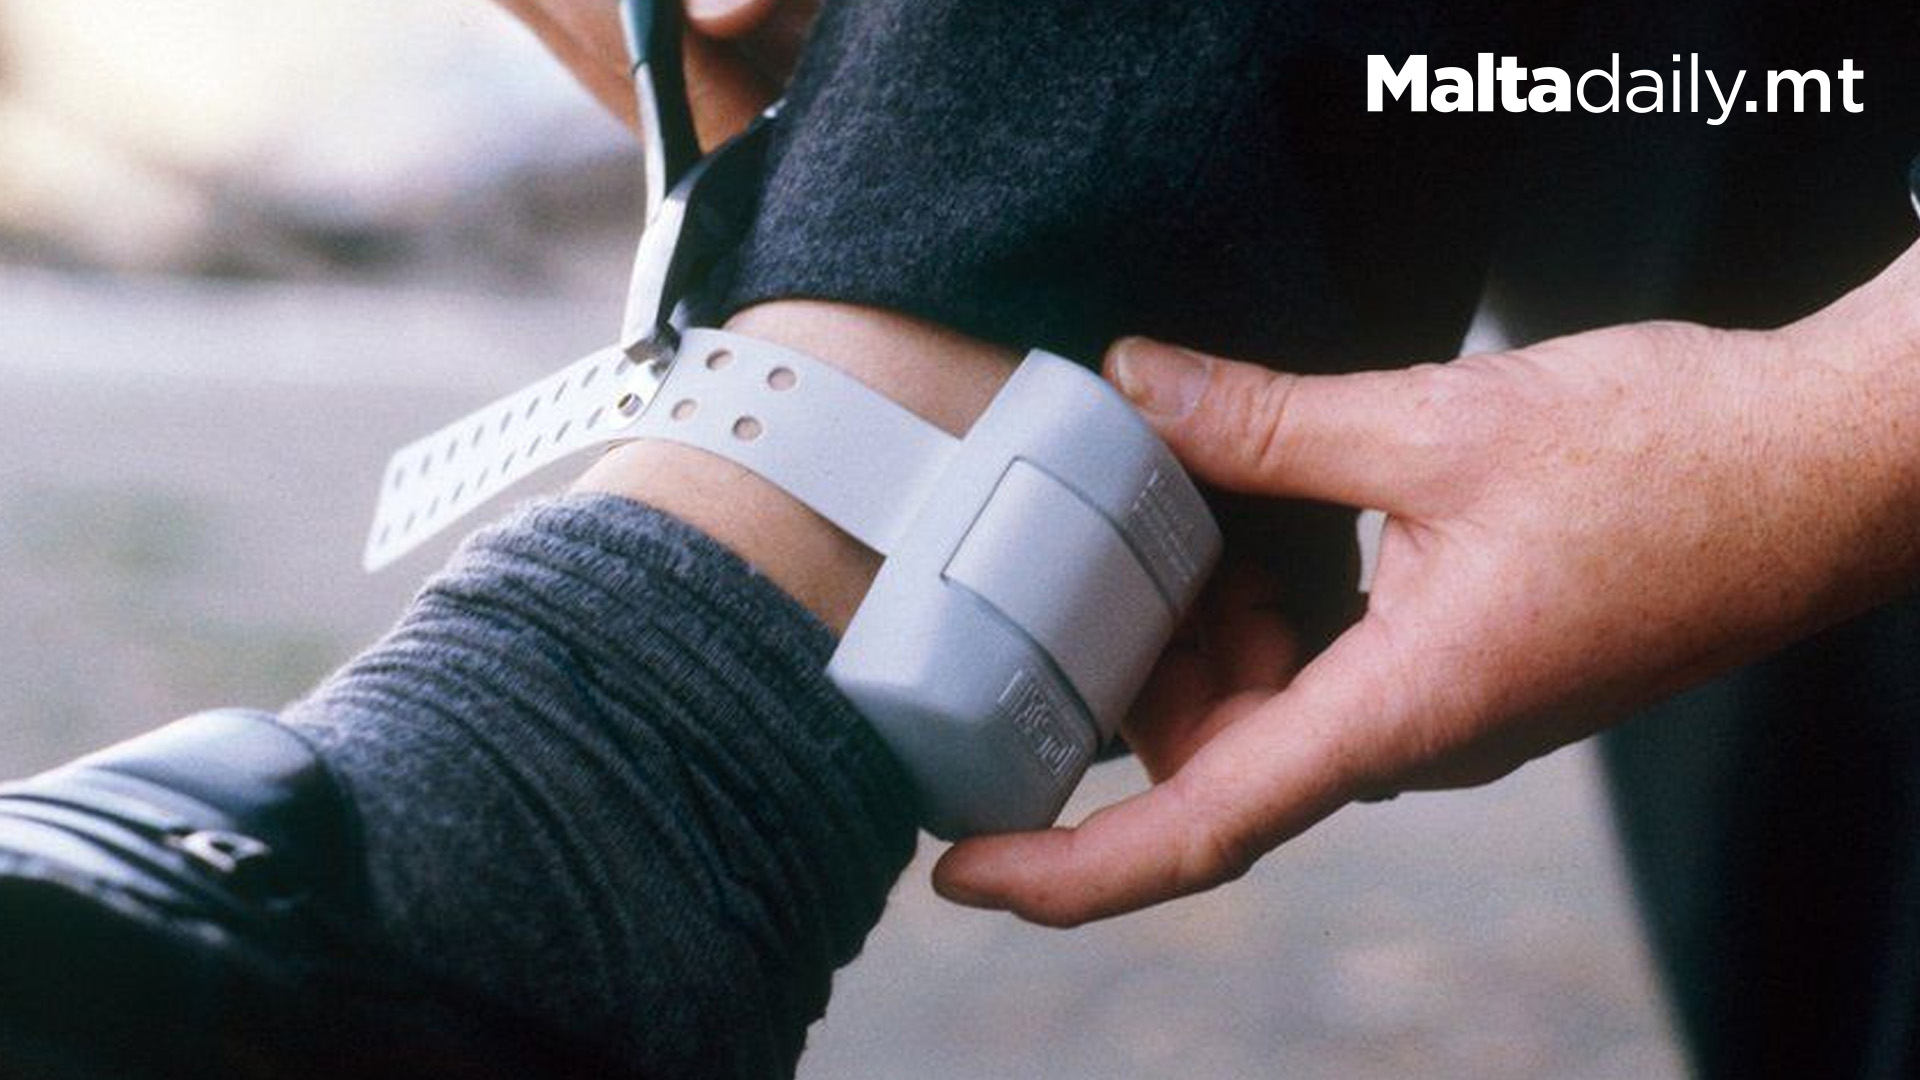 Crime Victims Could Be Allowed To Wear E-Tag, Minister Reveals